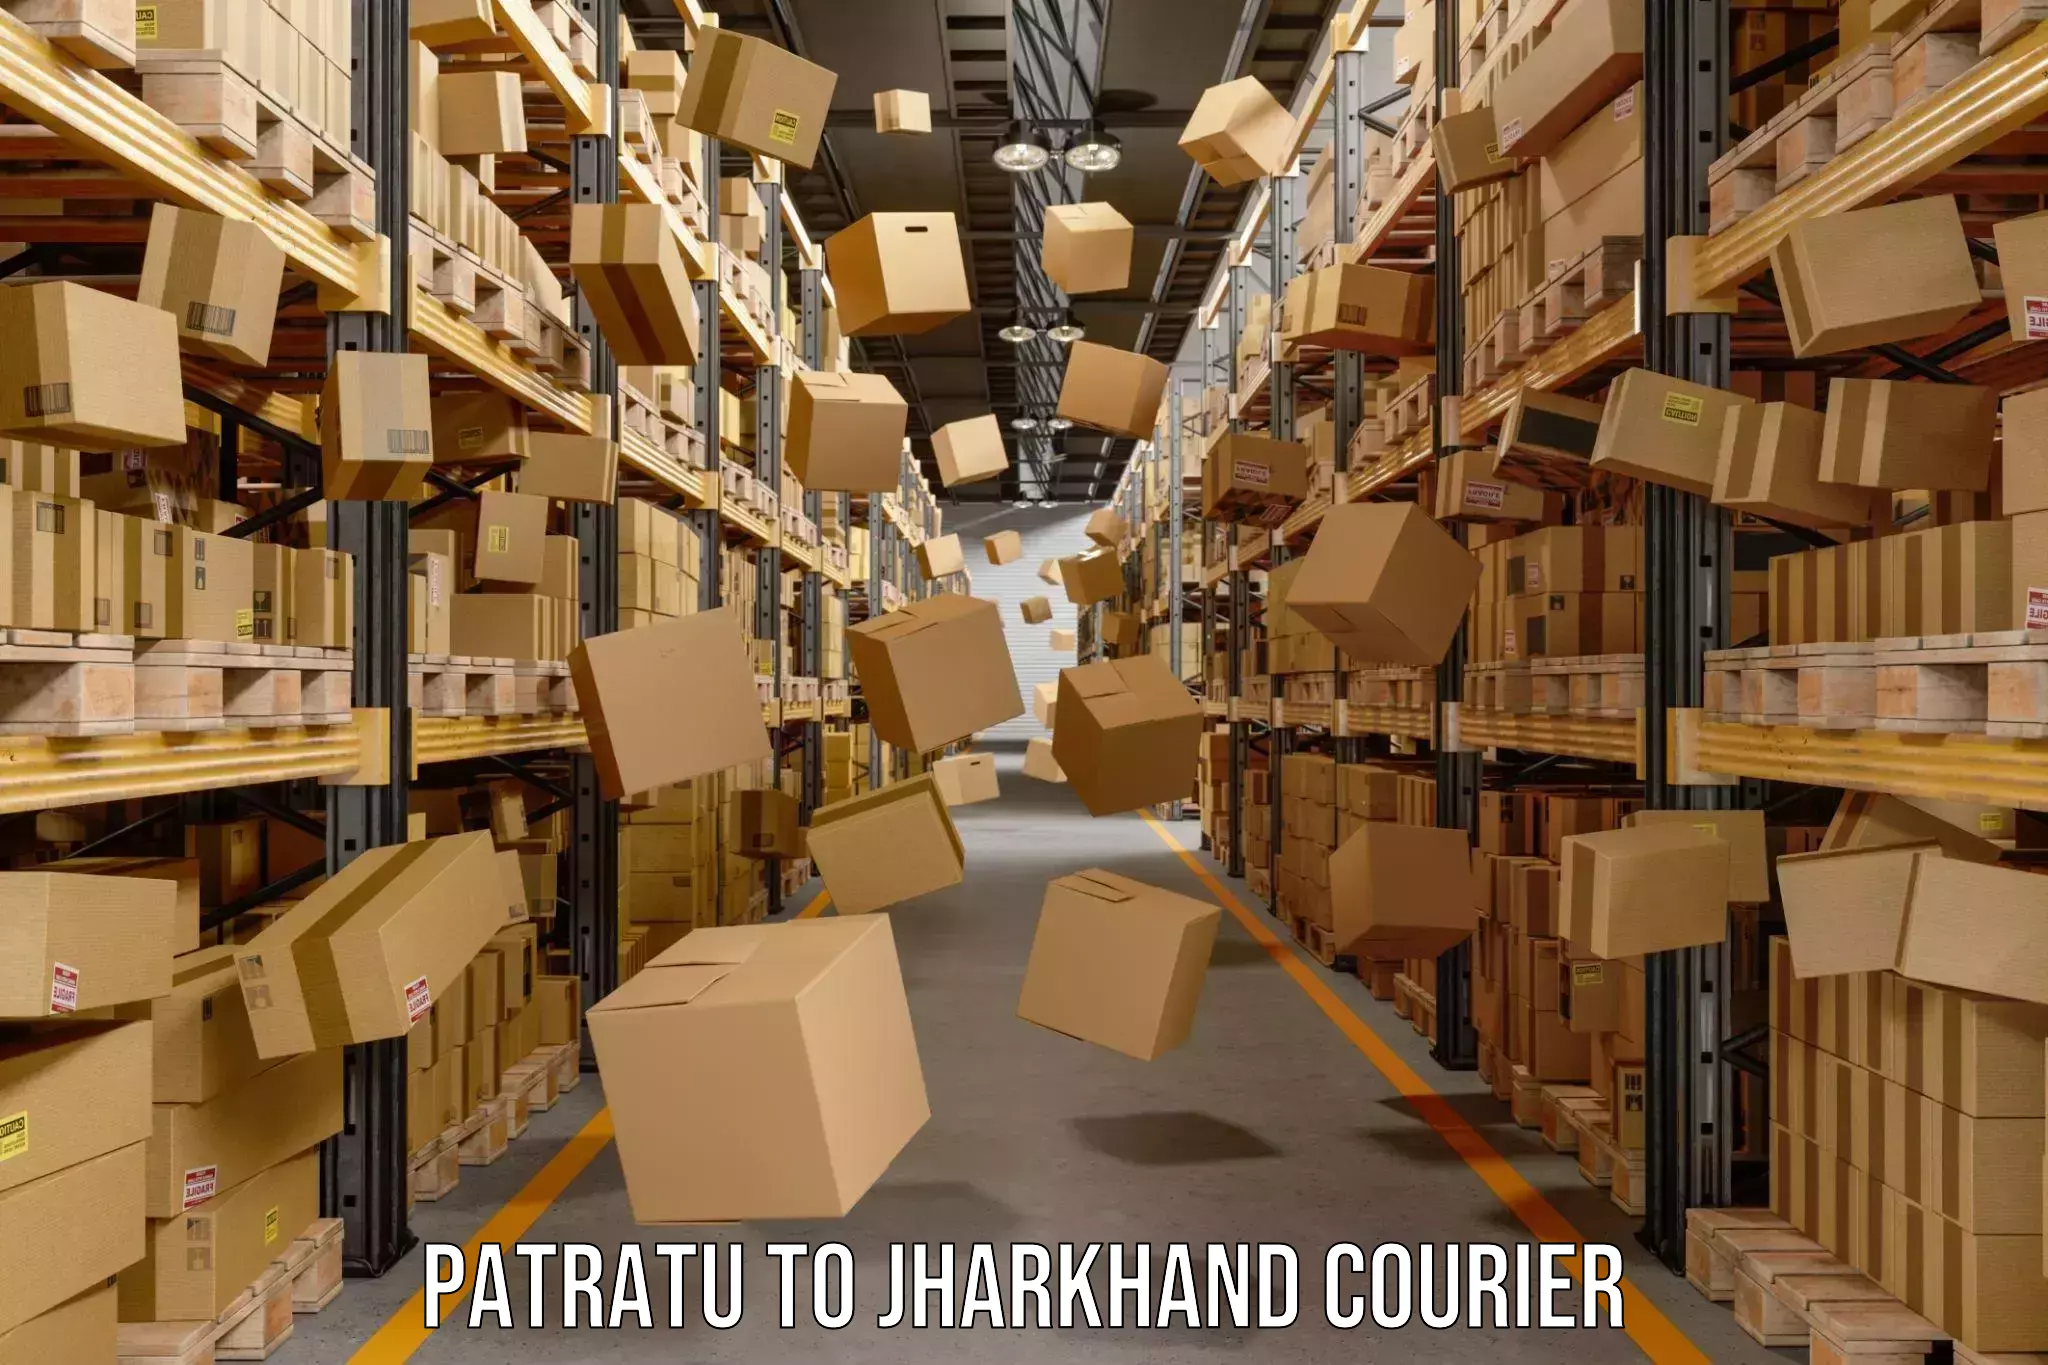 Courier service efficiency Patratu to Jharkhand